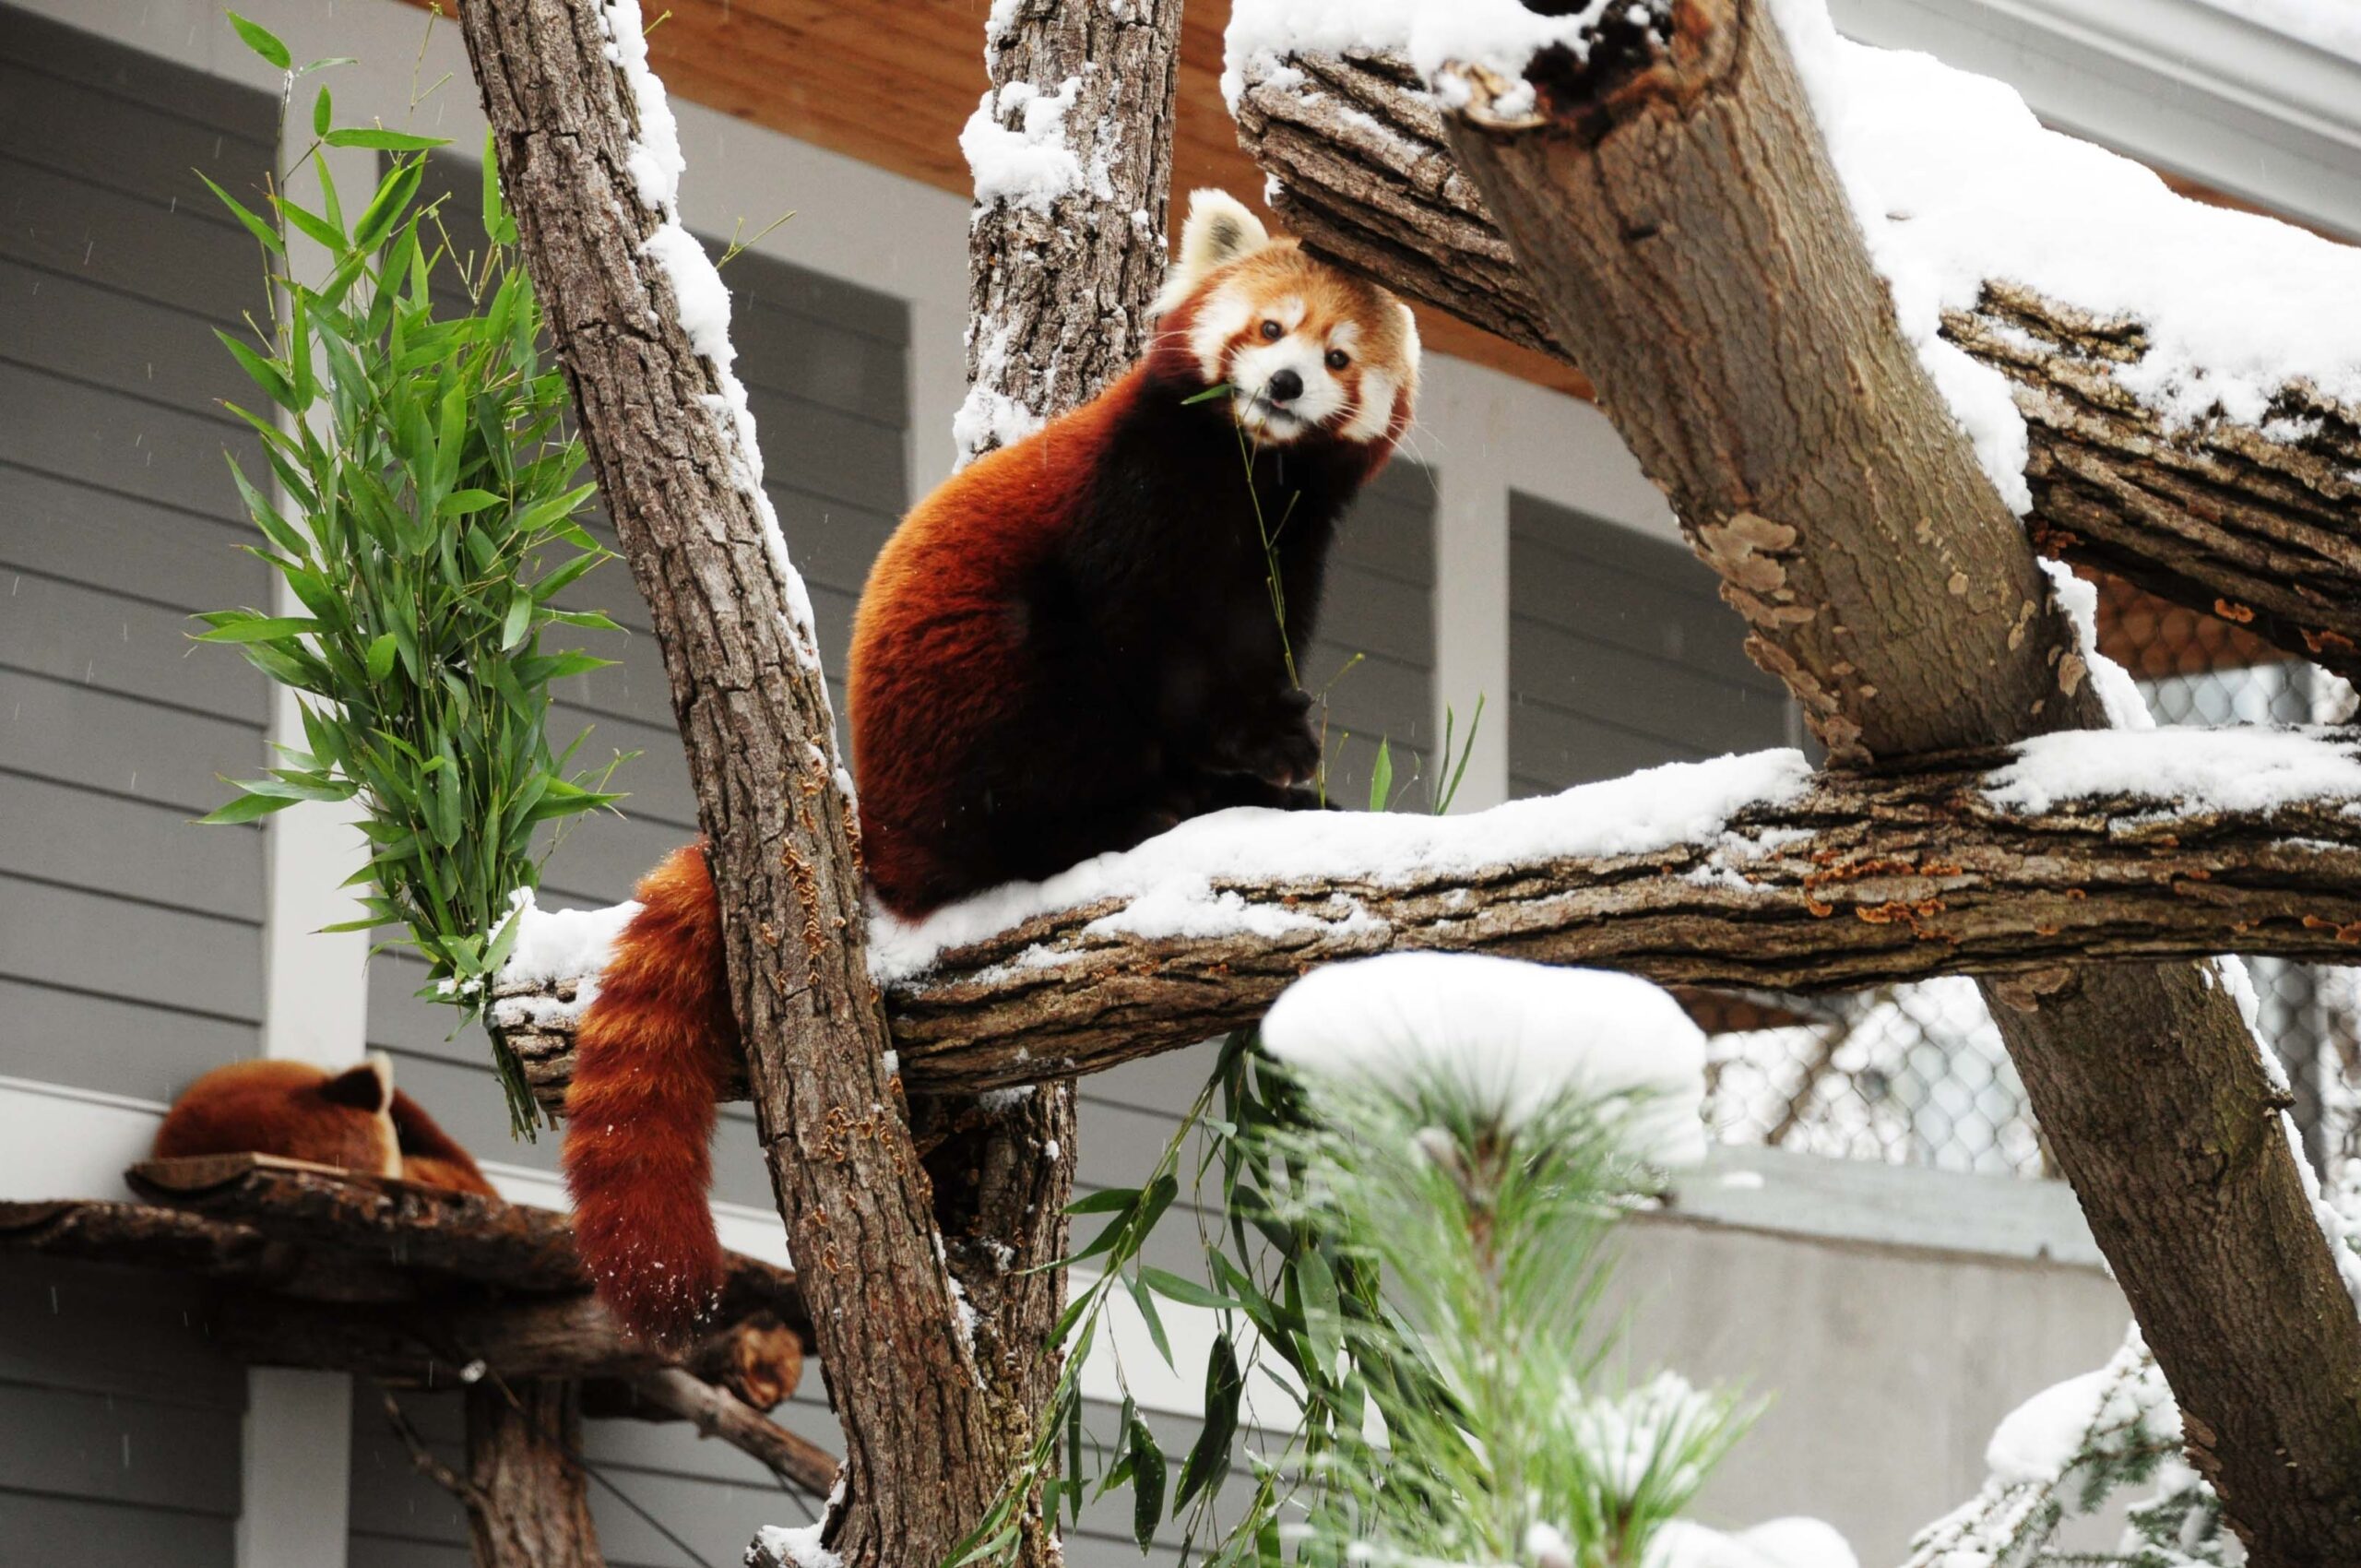 The Unexpected Joys of a Winter Visit to the Zoo